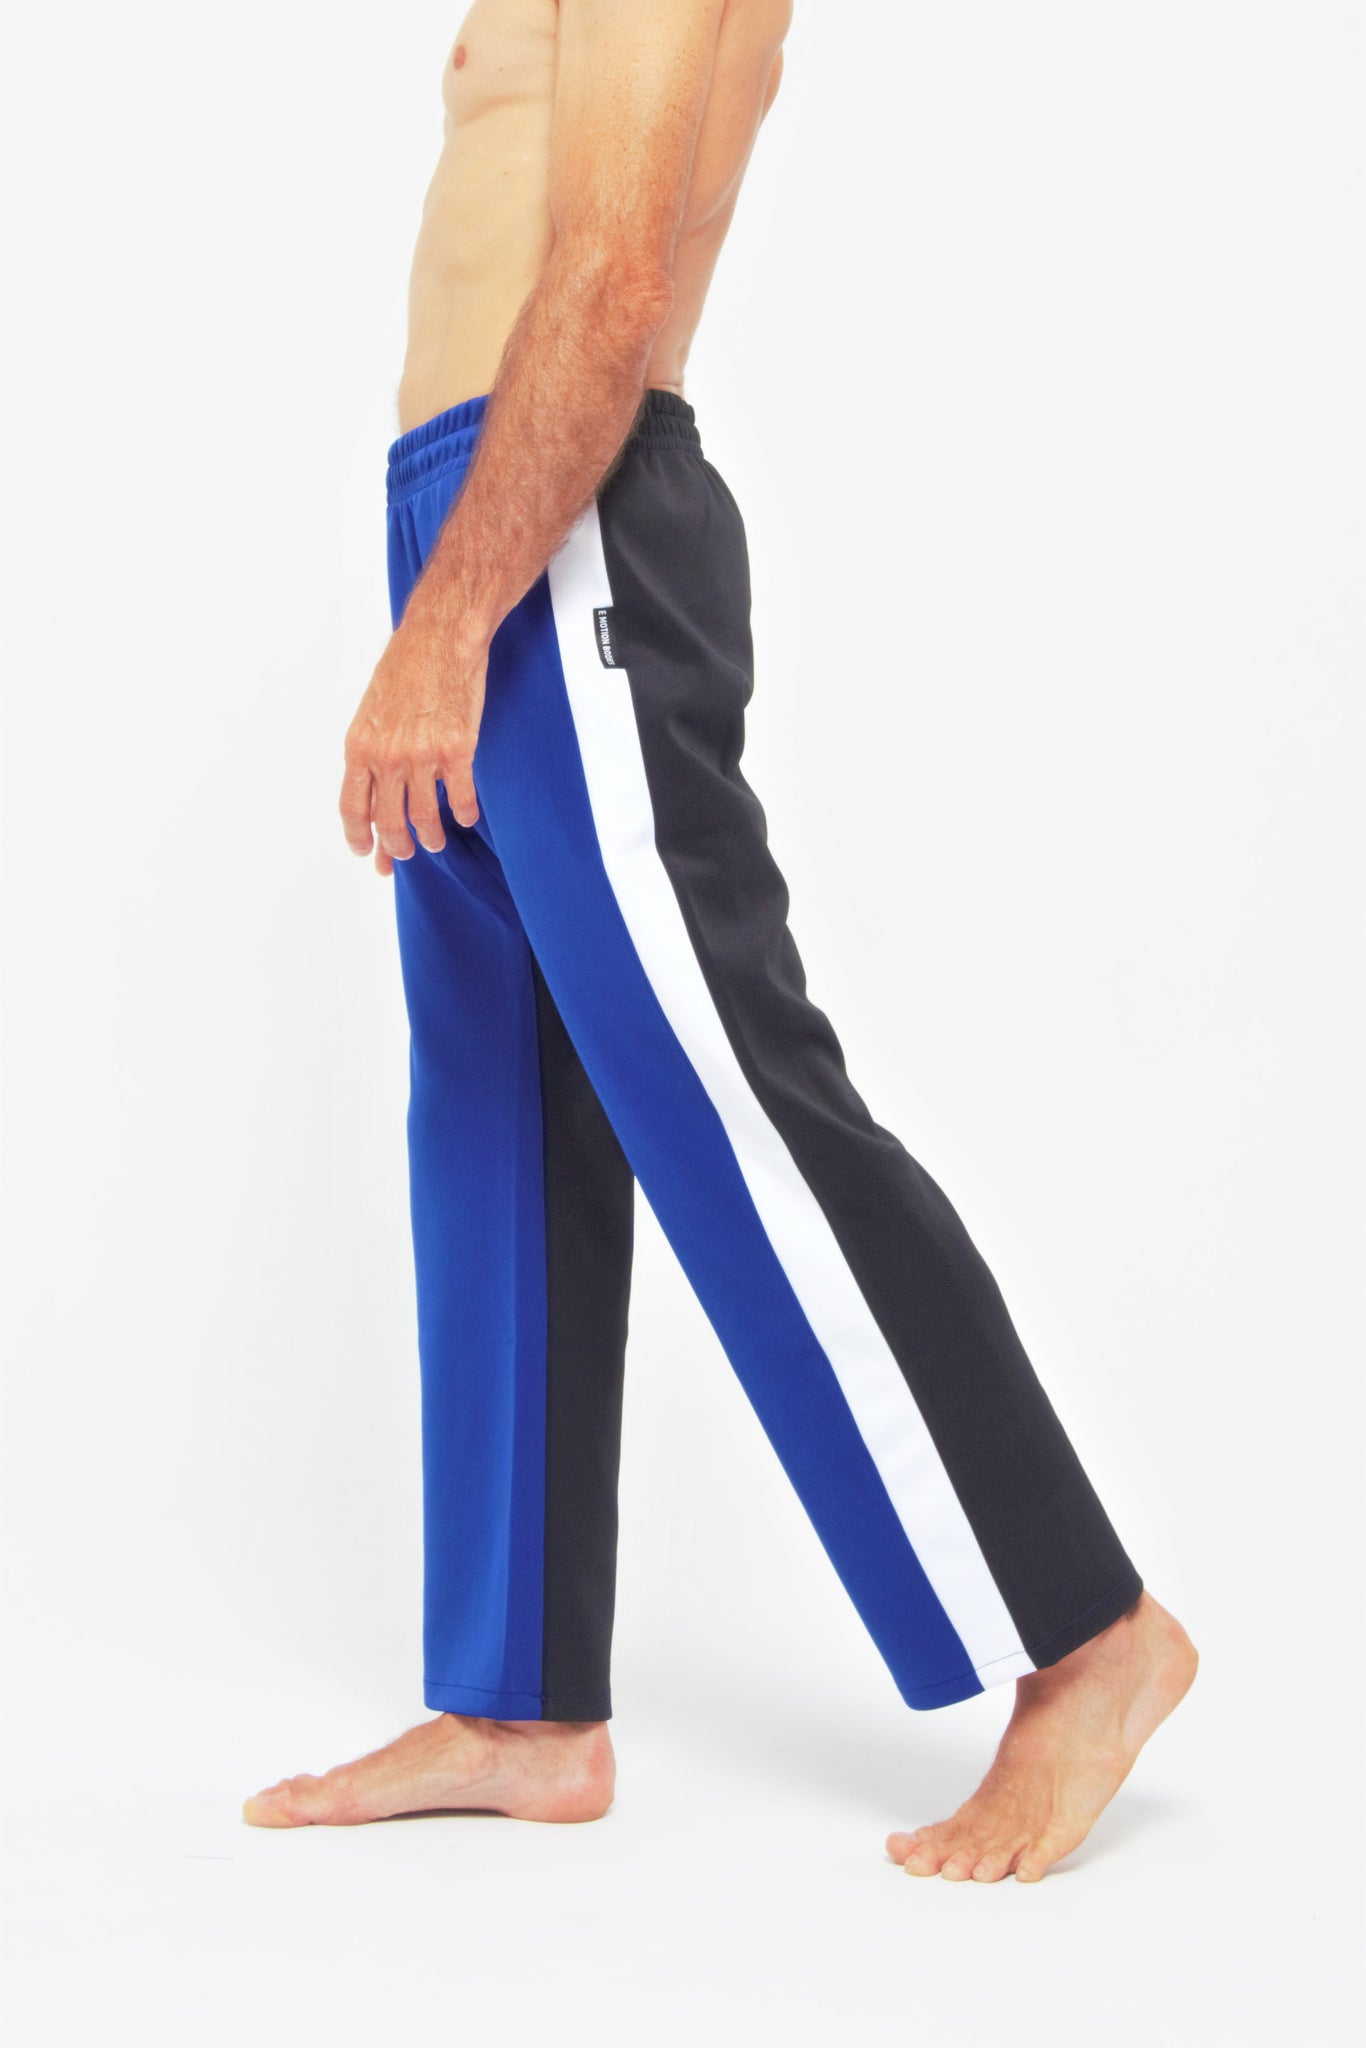 Flying Contemporary Dance Pants - Blue & White & Black